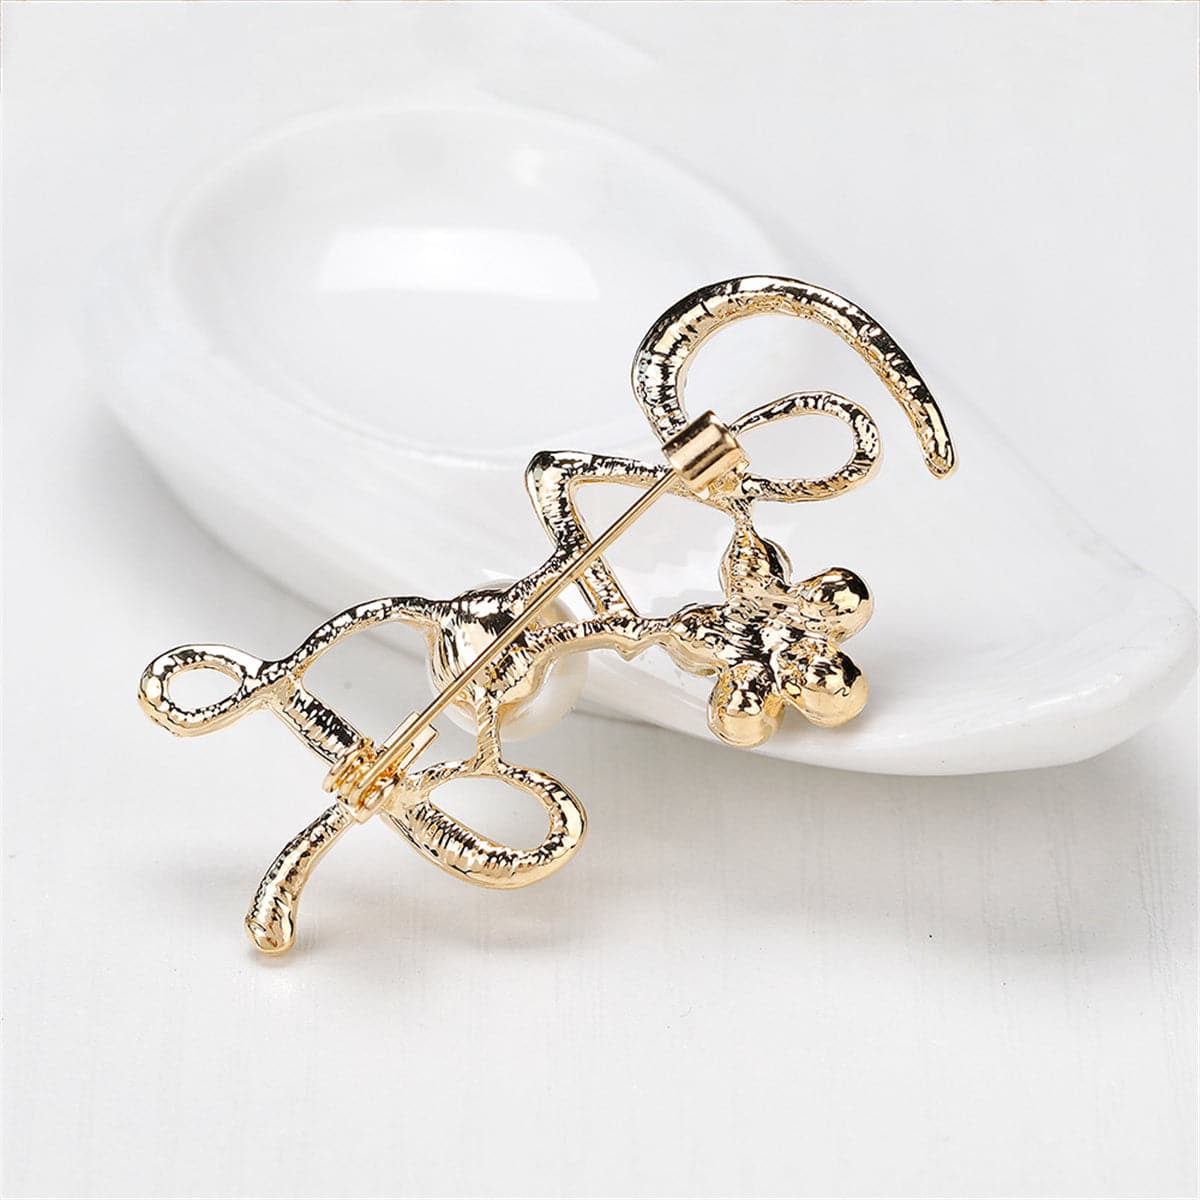 Cubic Zirconia & 18k Gold-Plated 'Love' Brooch